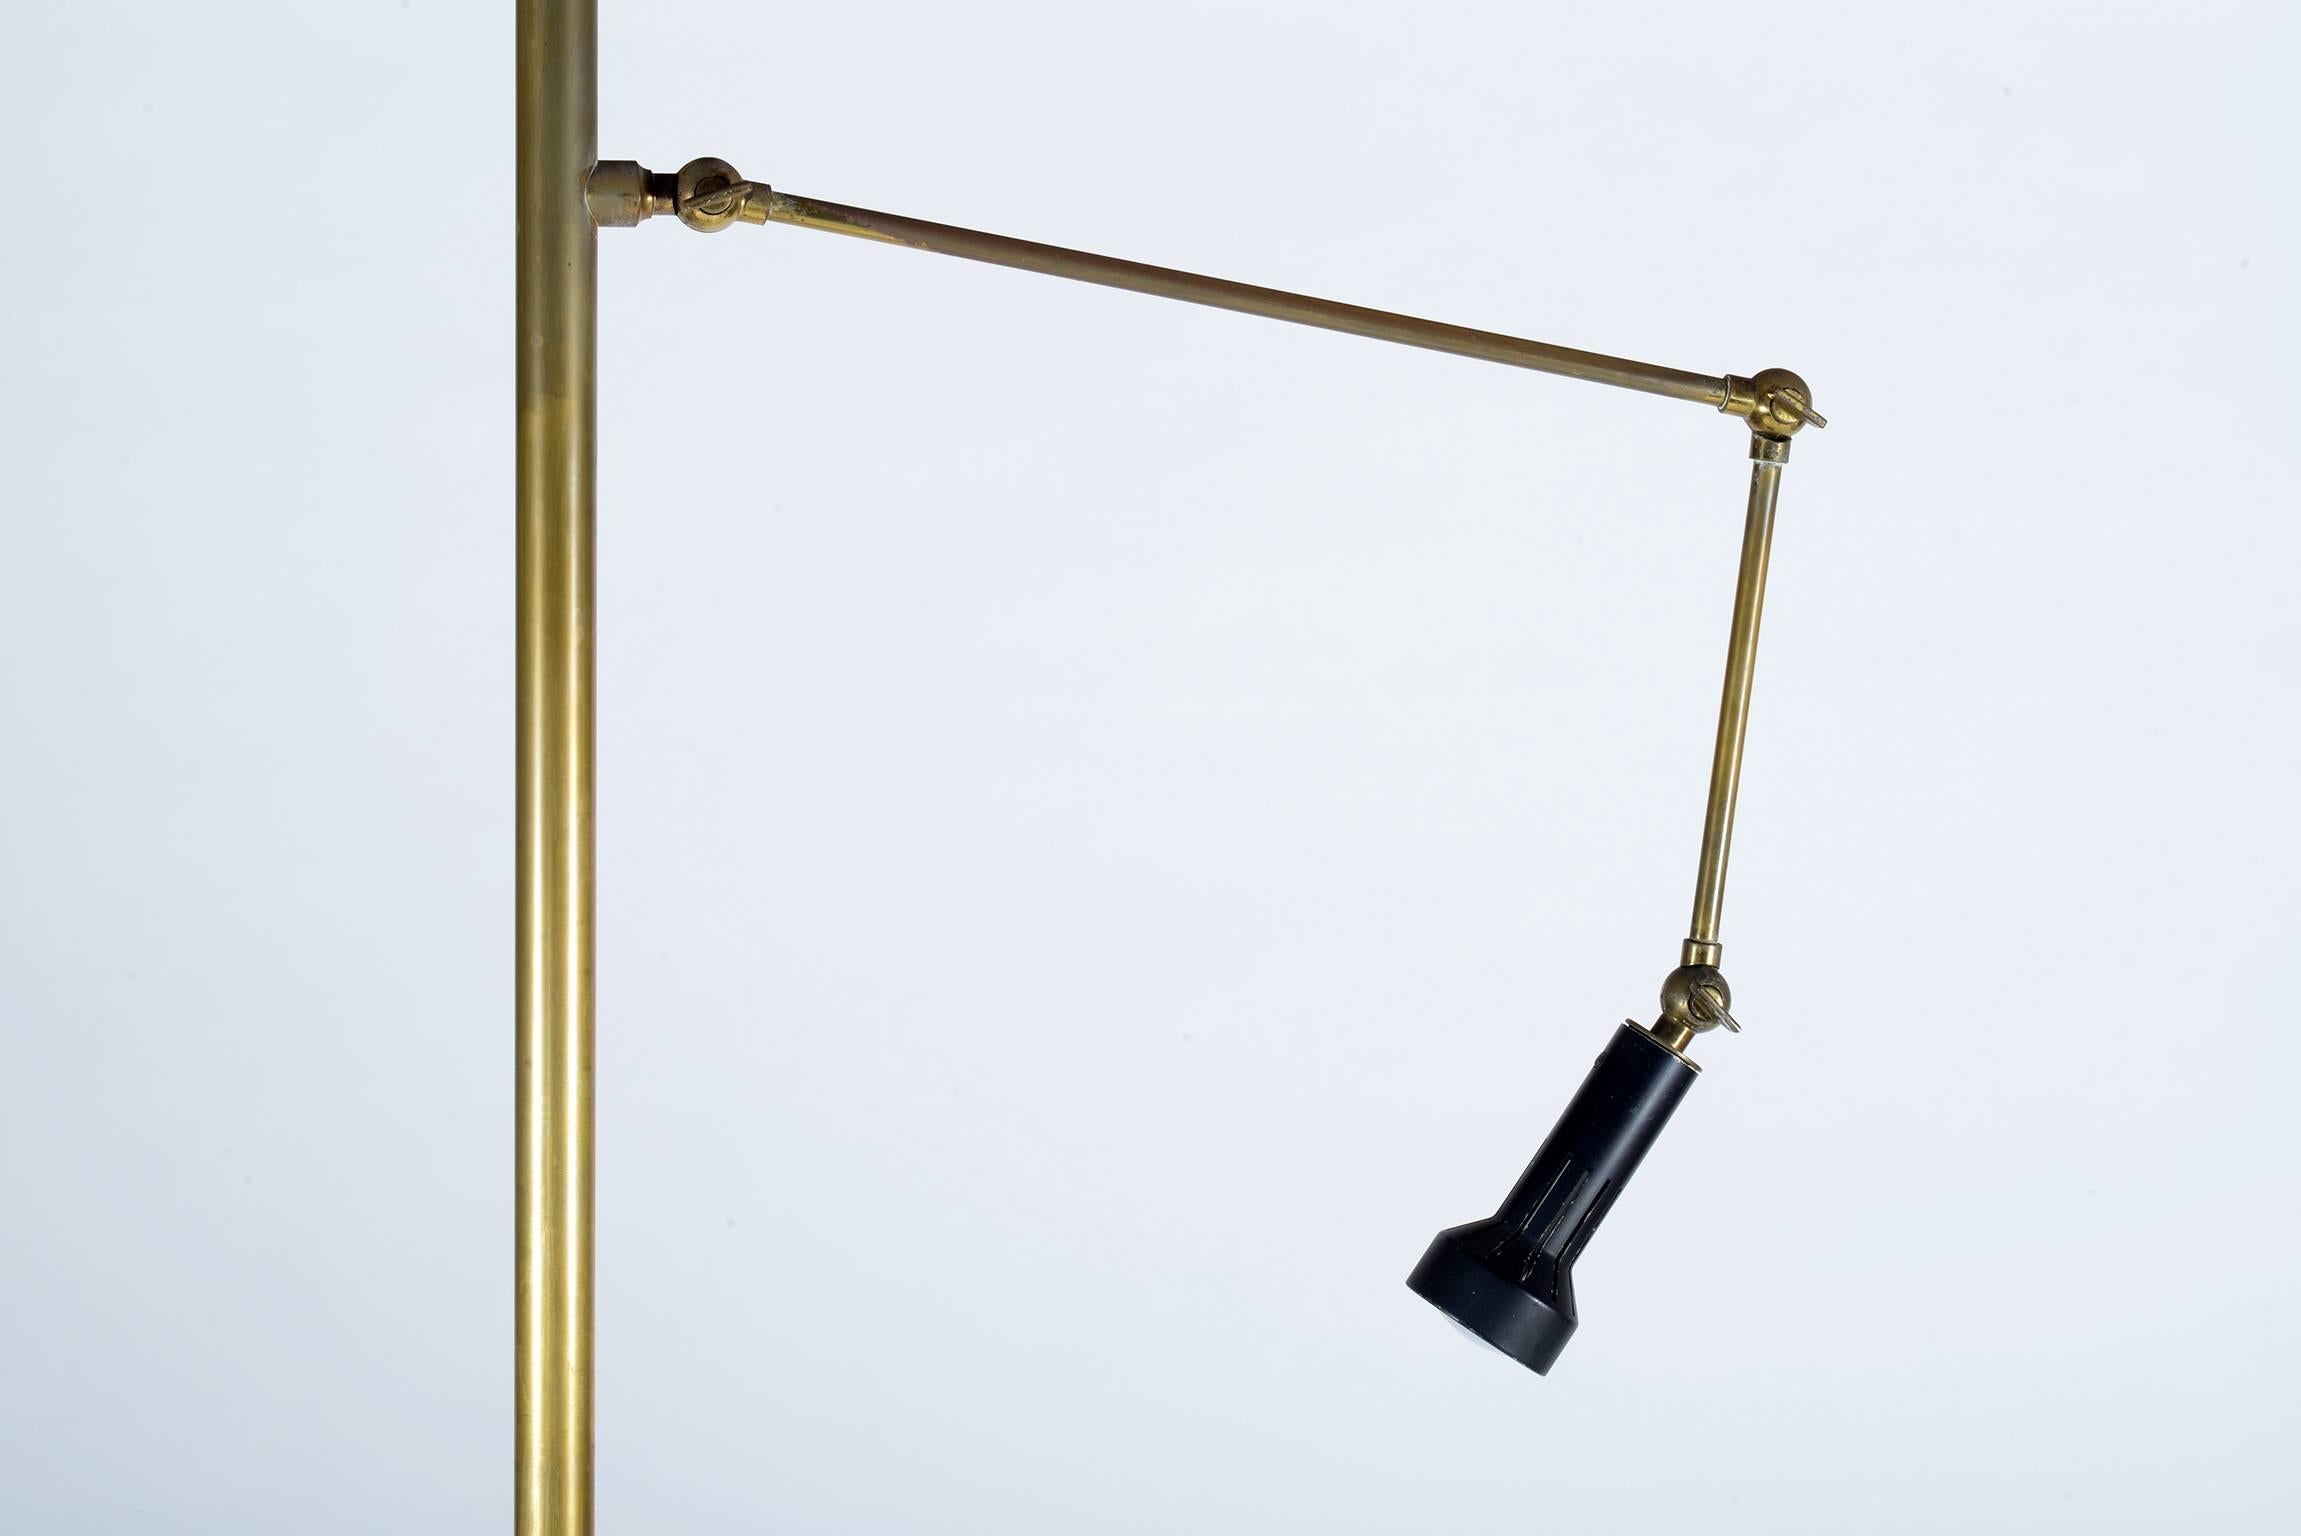 This cavalletto, easel floor lamp was designed by Angelo Lelli for Arredoluce model '12377', circa 1951. The Italian lamp features golden brass and black lacquered diffuser.
This icon of the Italian Mid-Century design has adjustable arms for